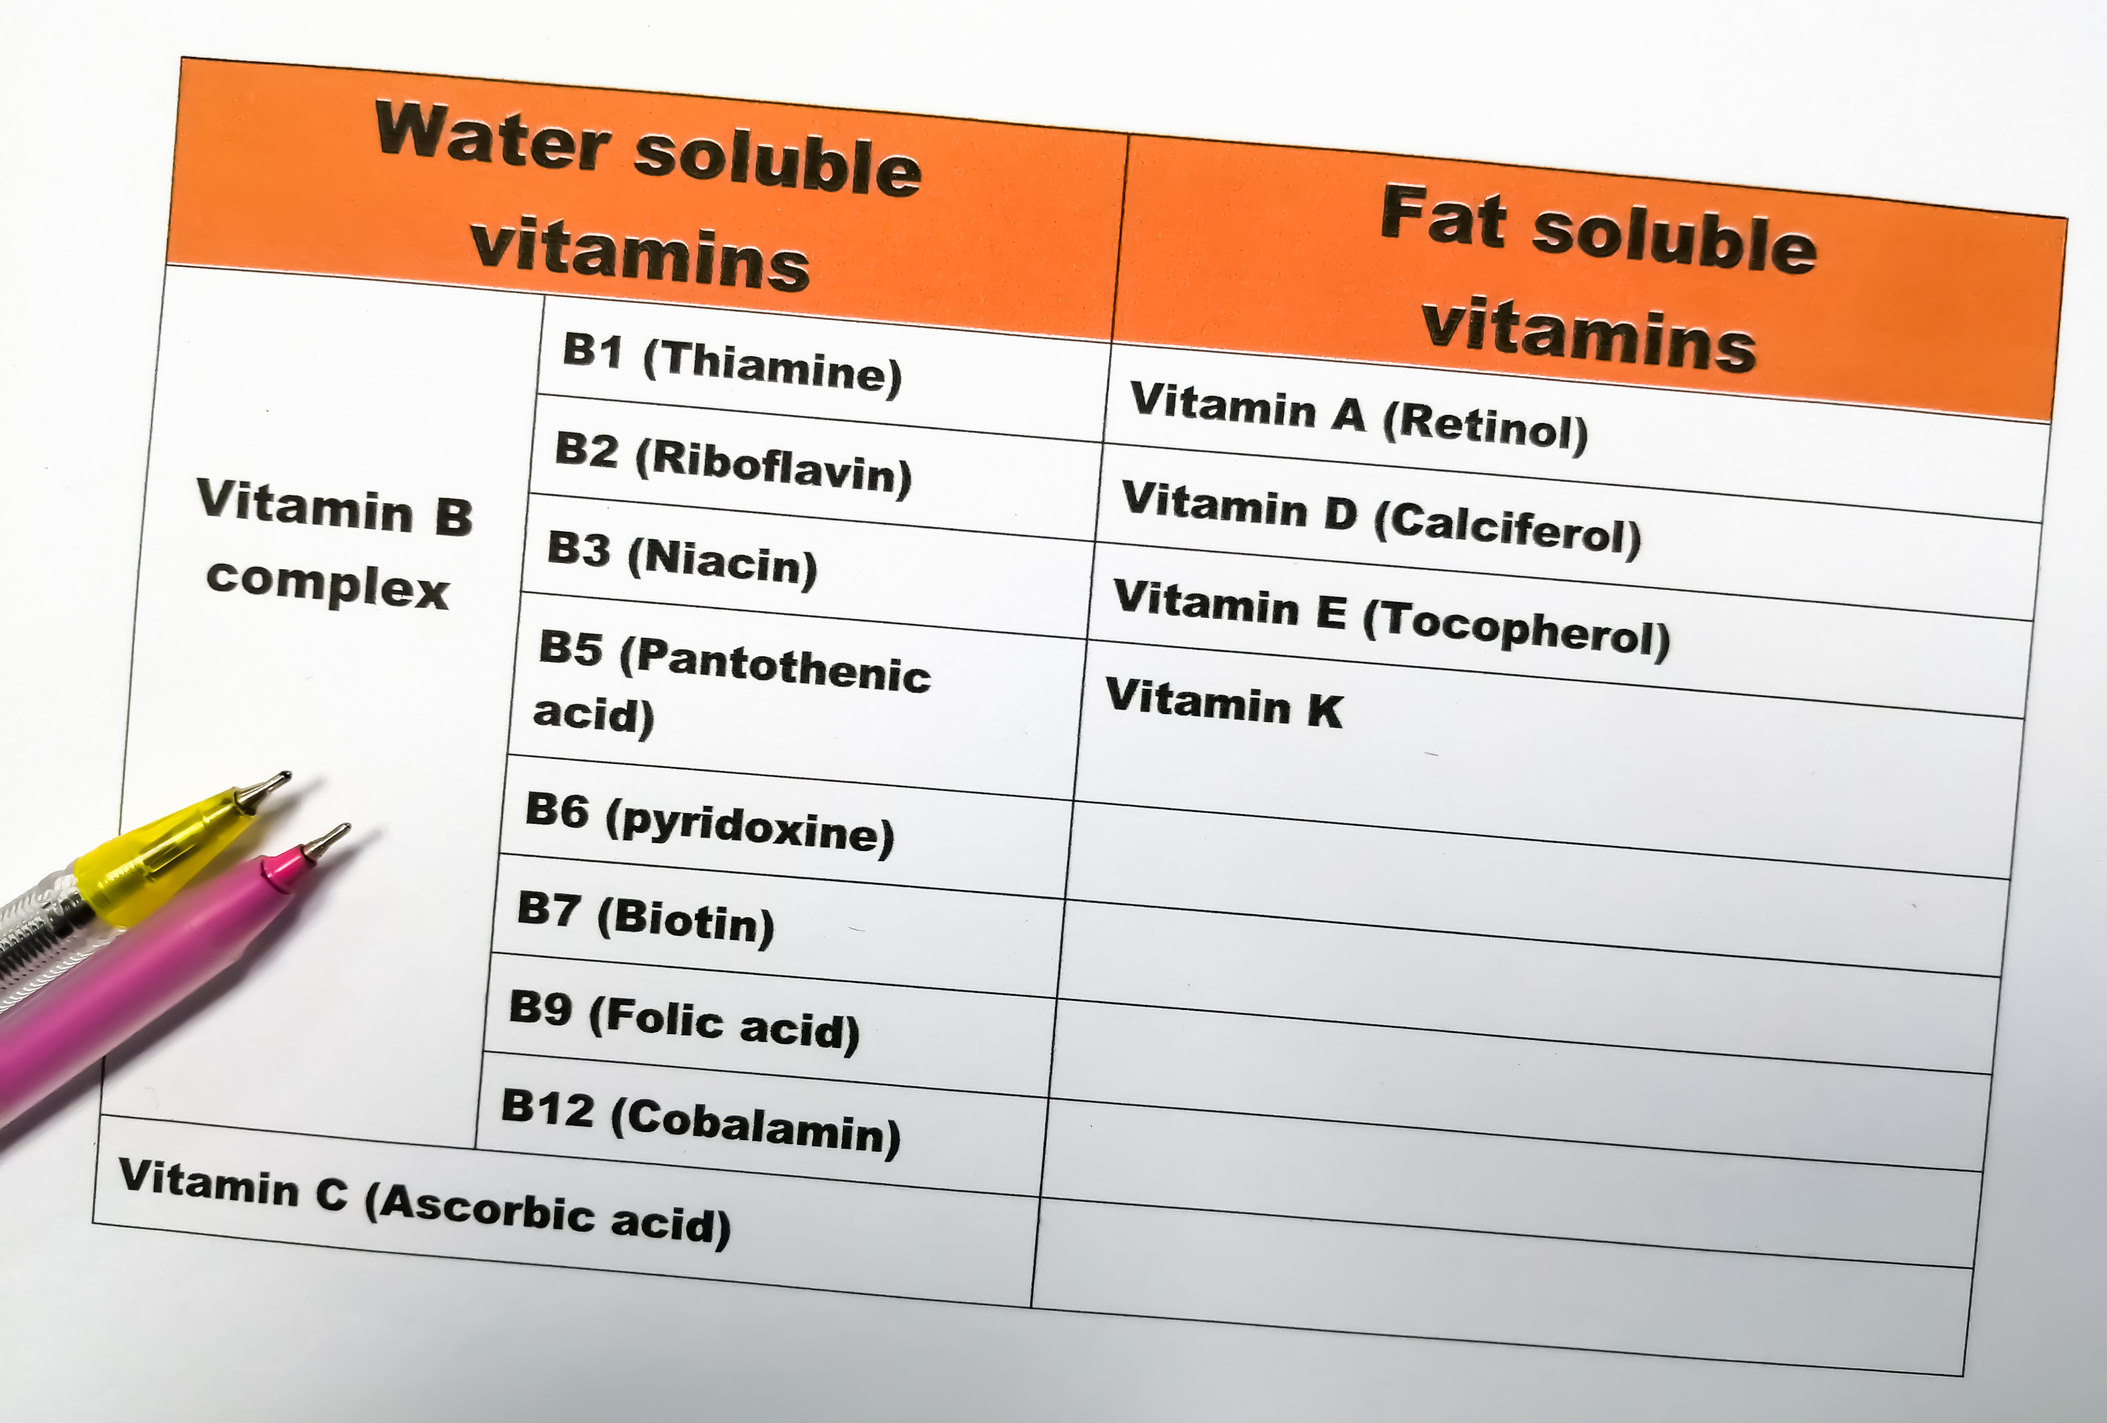 Water-soluble vitamin B12 / The table lists water-soluble and fat-soluble vitamins.